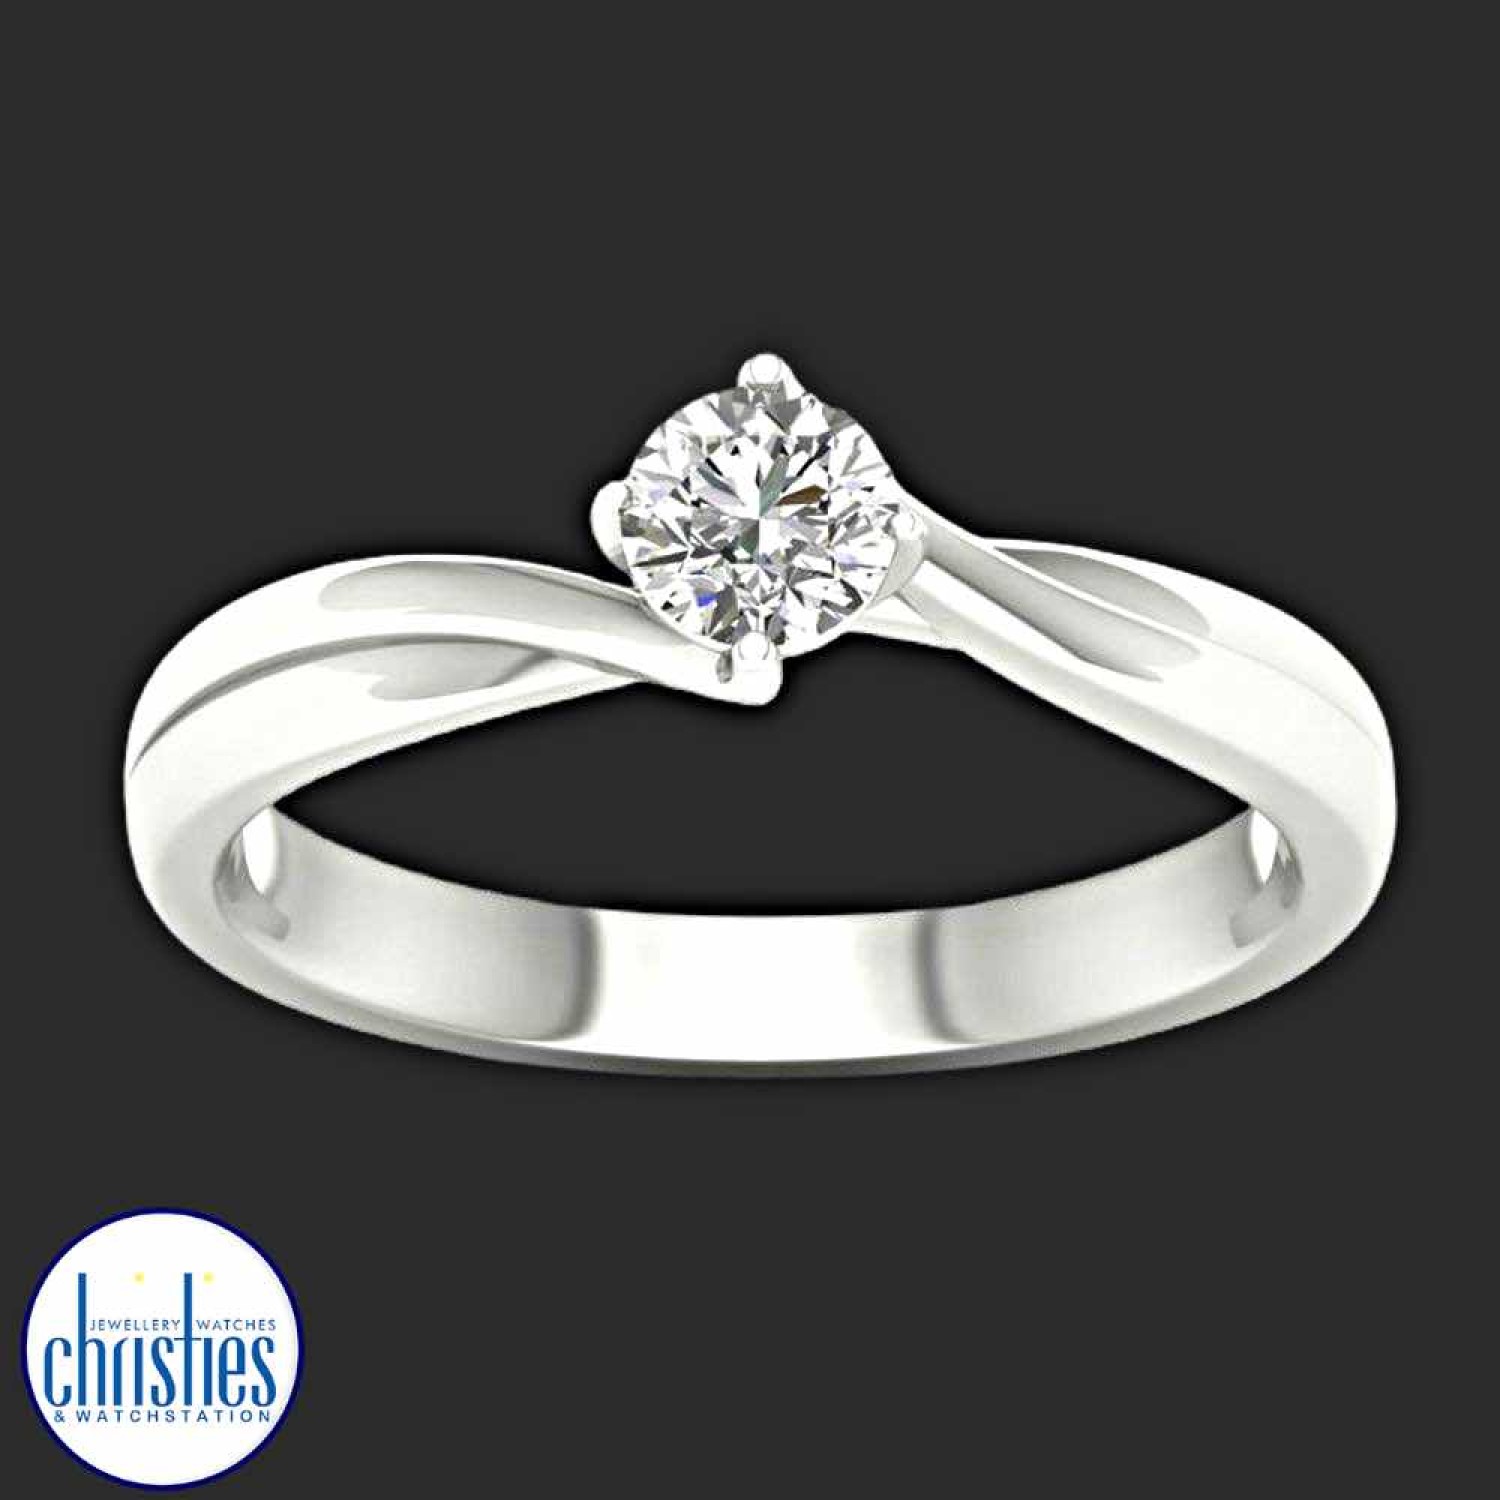 9ct White  Gold Diamond Solitaire 0.33ct Ring MSD0391EG. A 9ct white gold  diamond ring with a total of 0.33ct of diamonds  Afterpay - Split your purchase into 4 instalments - Pay for your purchase over 4 instalments, due every two weeks. You’ll pay your 